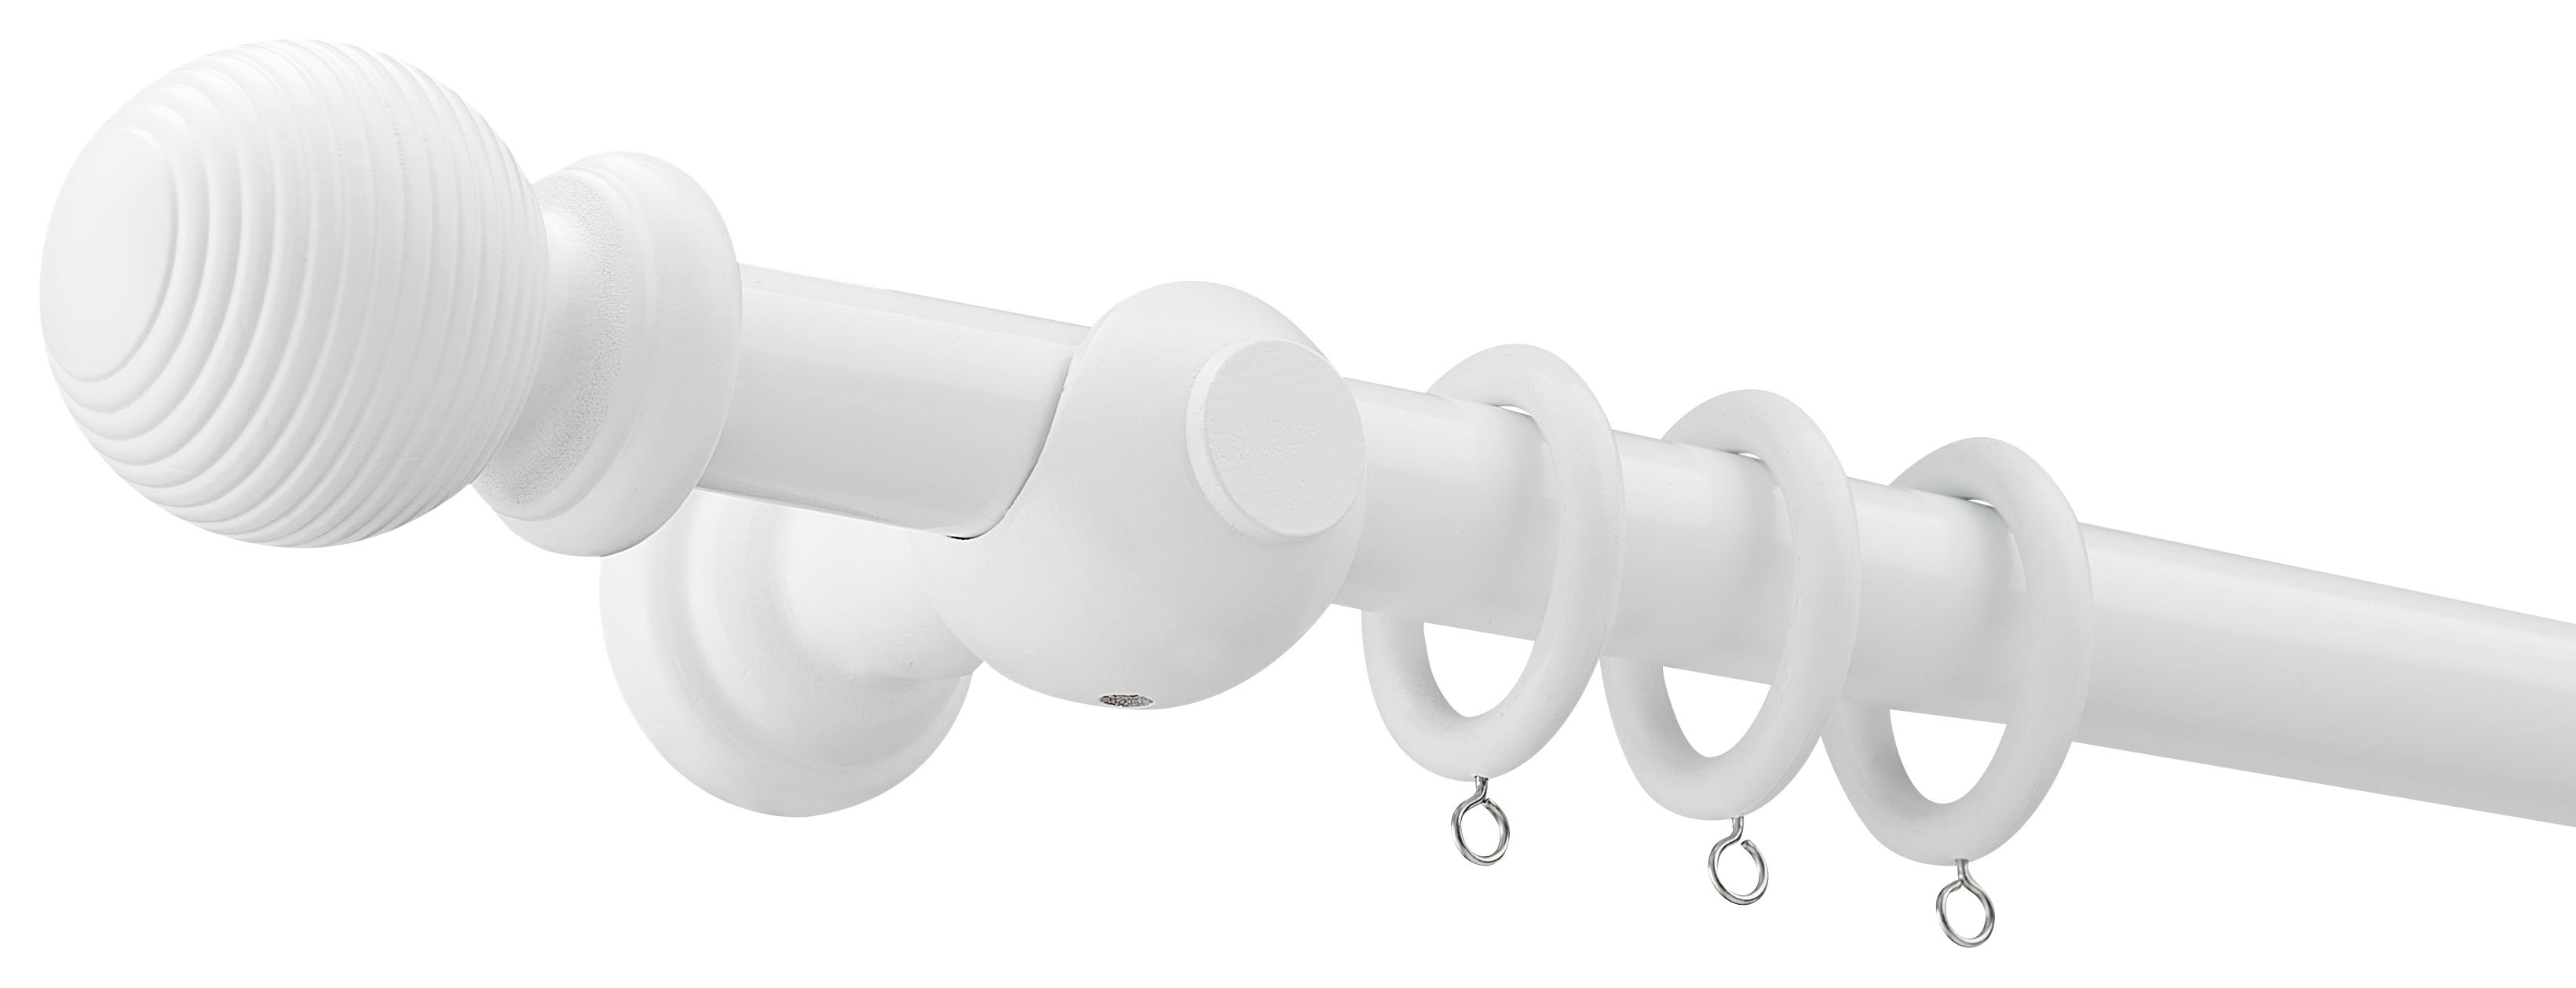 Wickes 28mm Wooden Fixed Curtain Pole White 1.5m - 2.4m